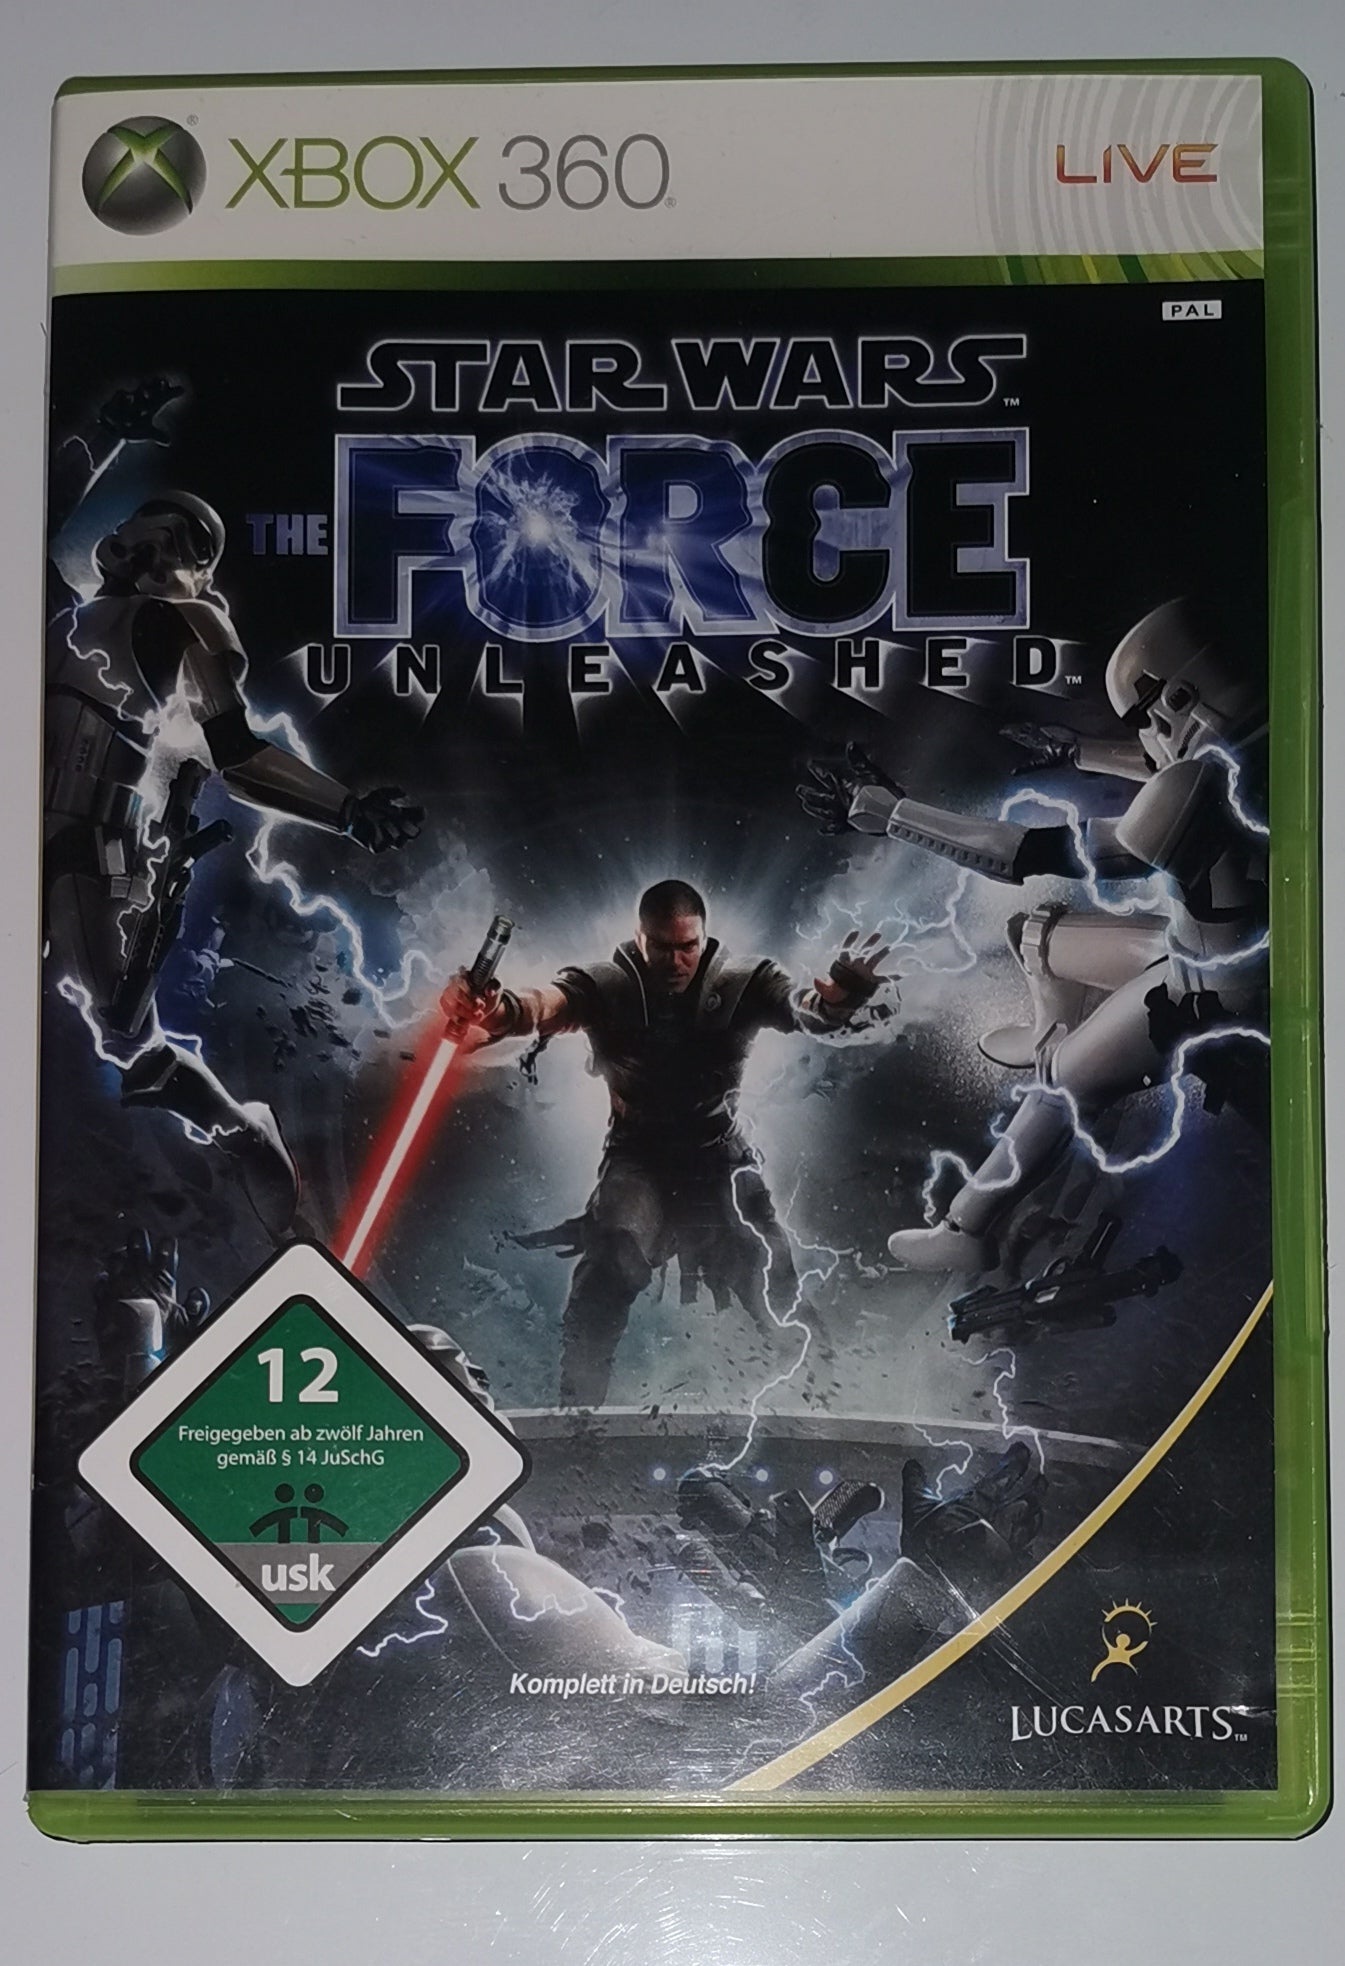 Star Wars The Force Unleashed (Xbox 360) [Gut]